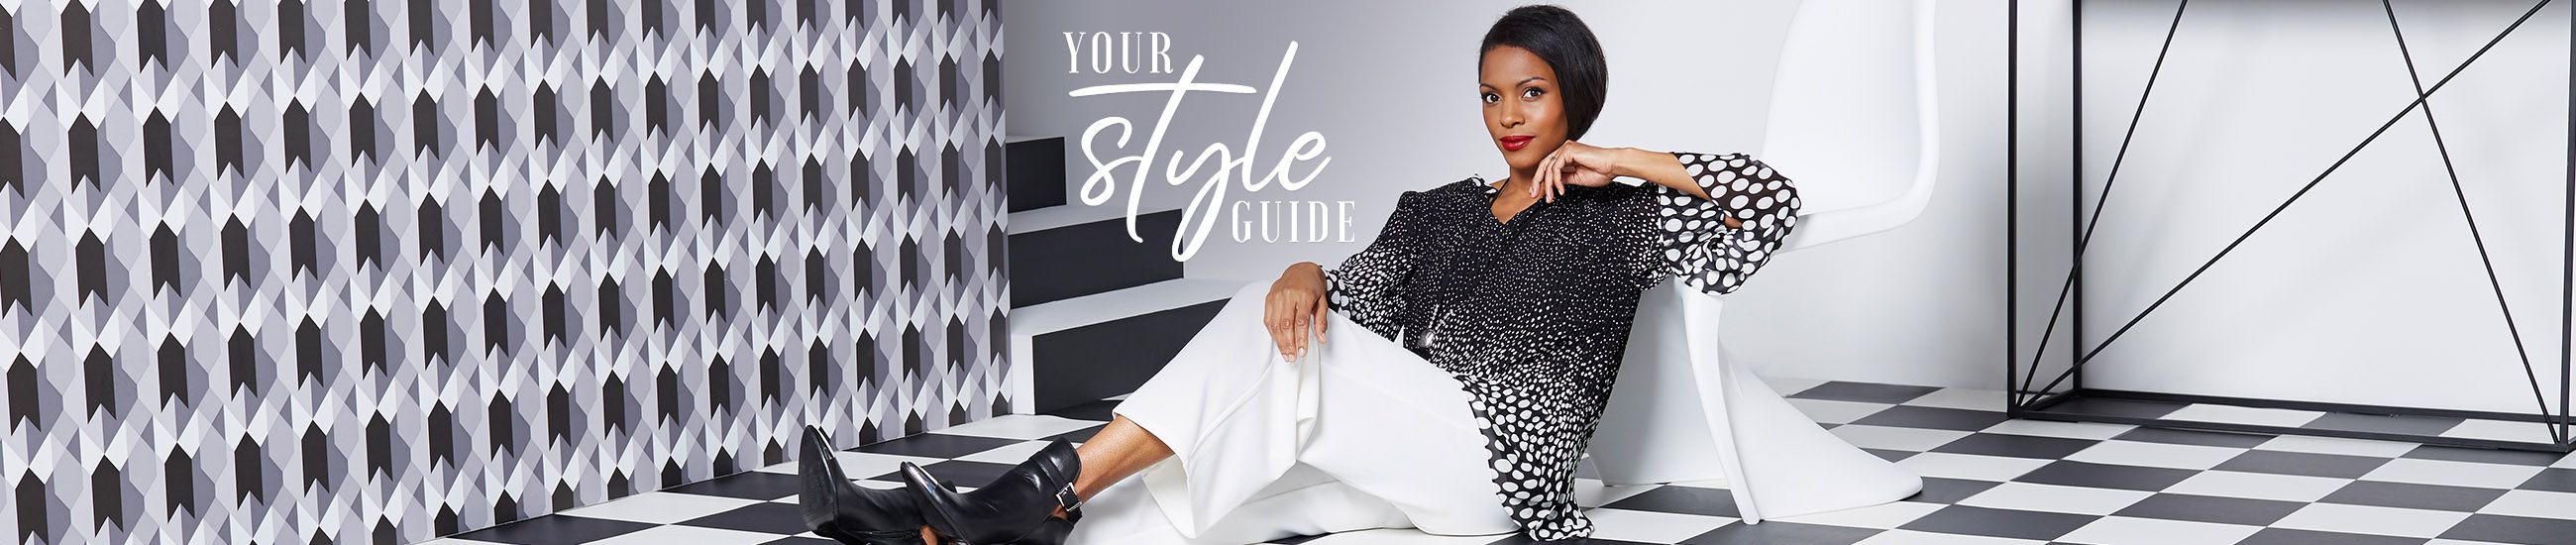 Your Style Guide - Monochrome